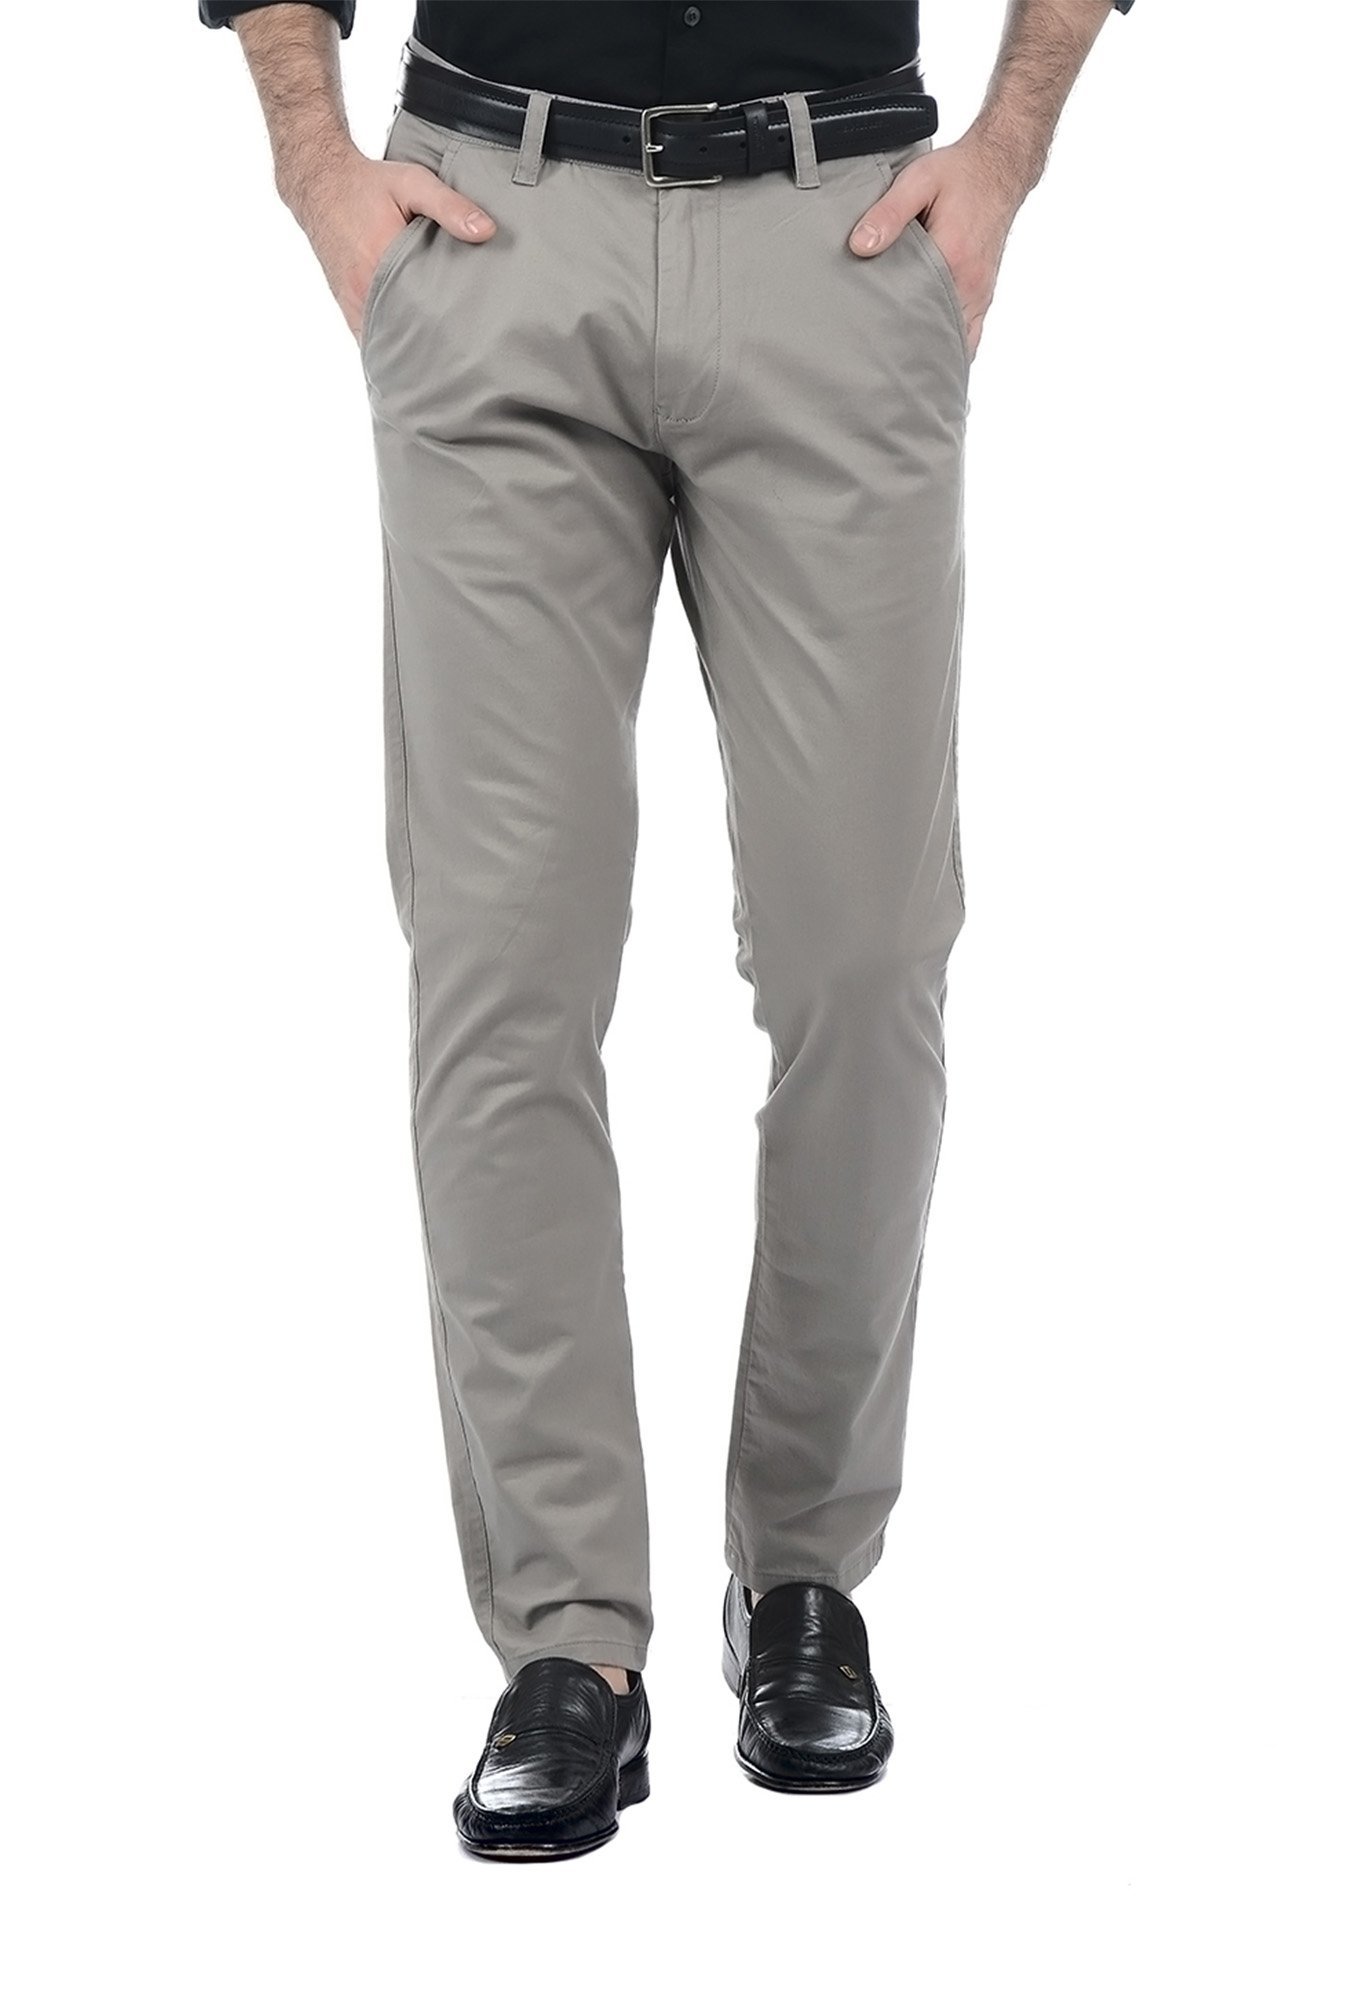 Buy Brown Trousers  Pants for Men by French Connection Online  Ajiocom